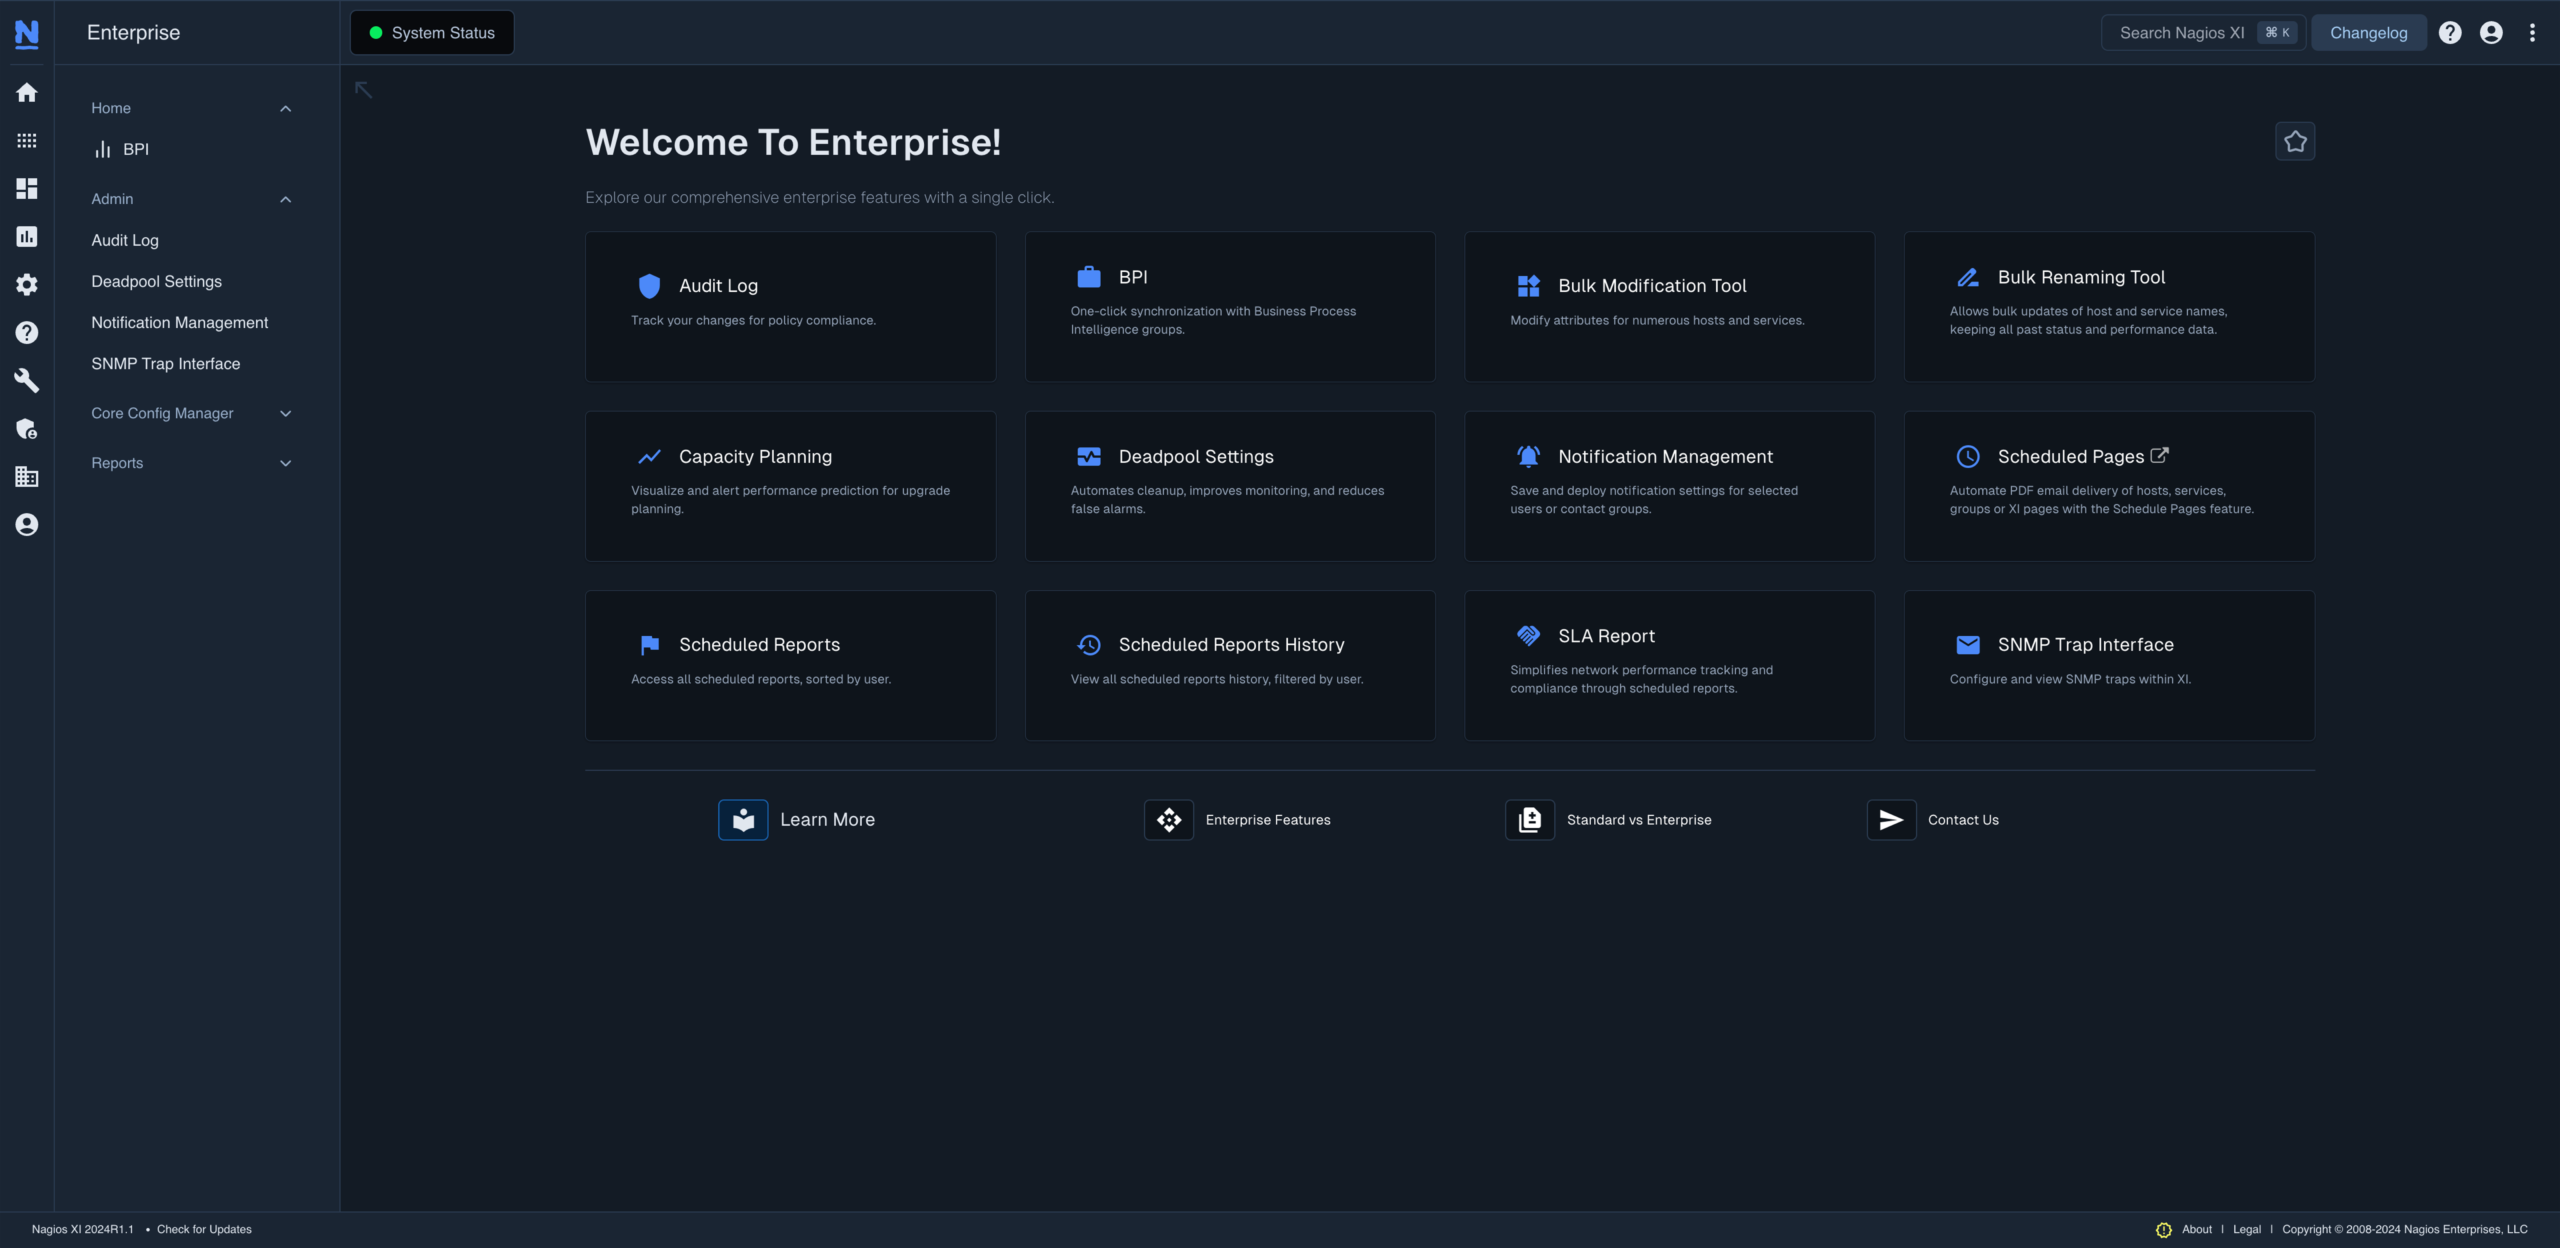 A screenshot of the enterprise features overview page. Taken on the new Neptune theme in Nagios XI.